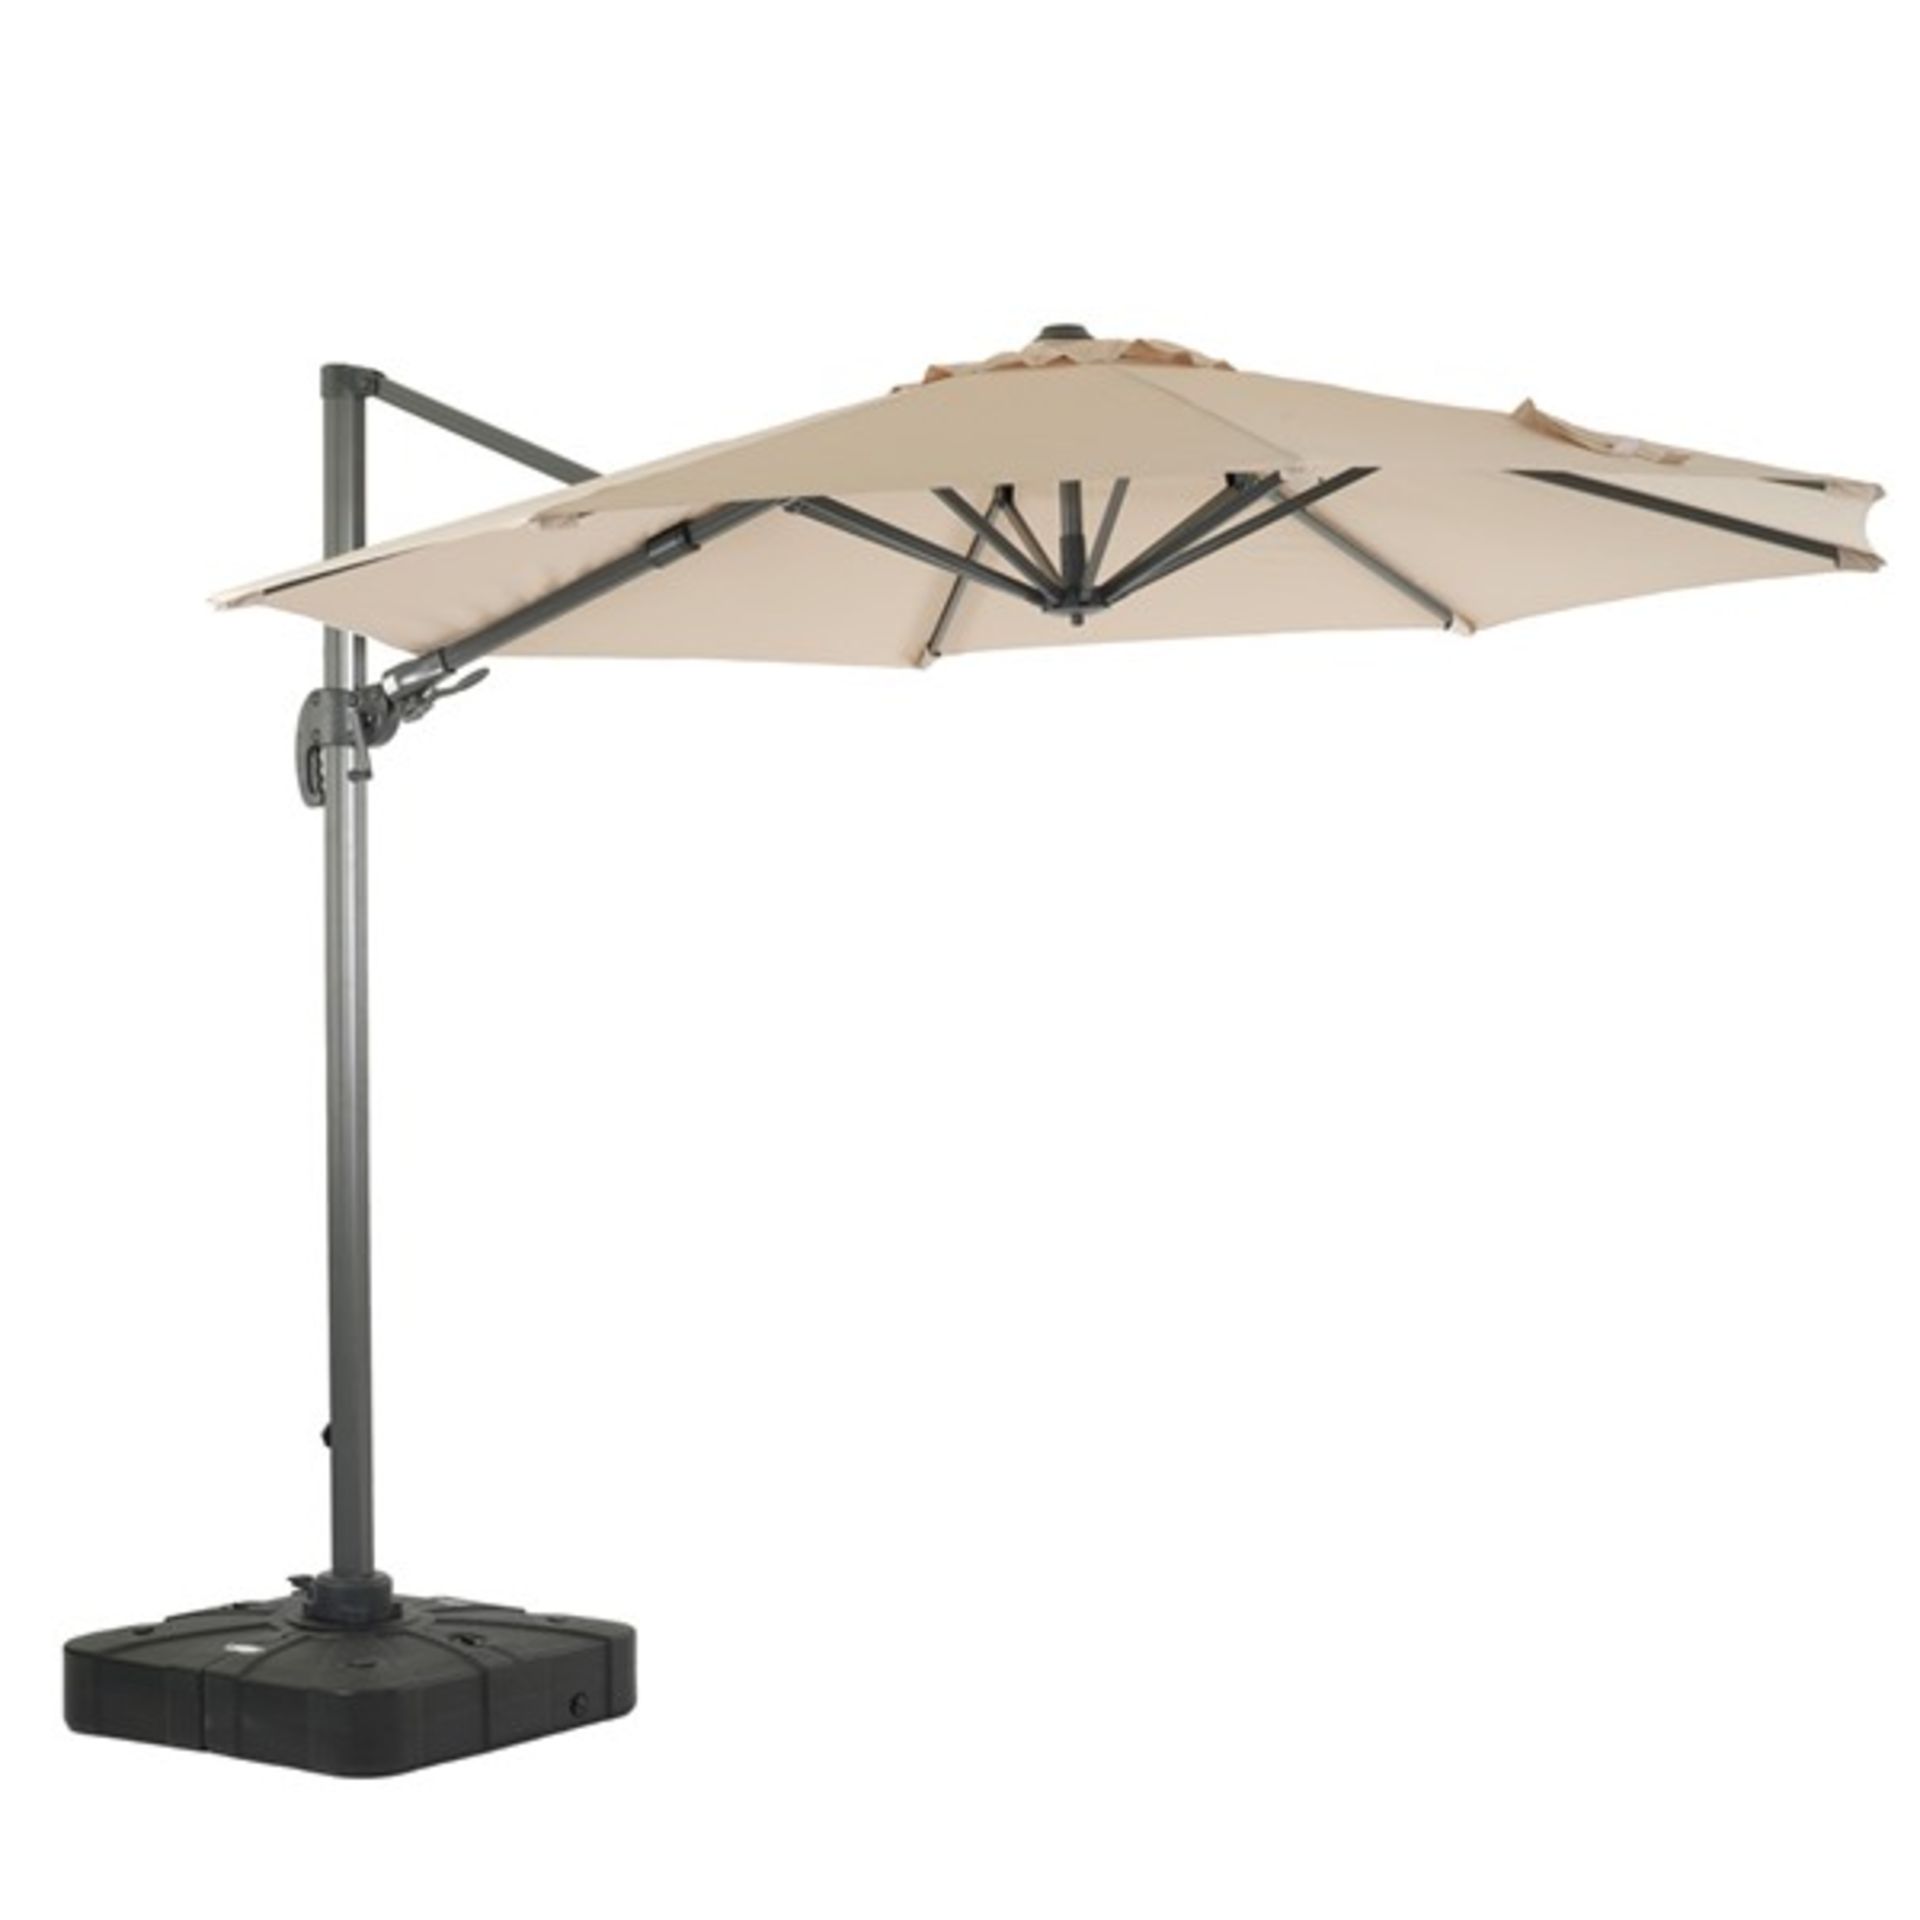 V *TRADE QTY* Brand New 3.5m Cantilever Parasol With LED Lighting, Remote Control & Base - John